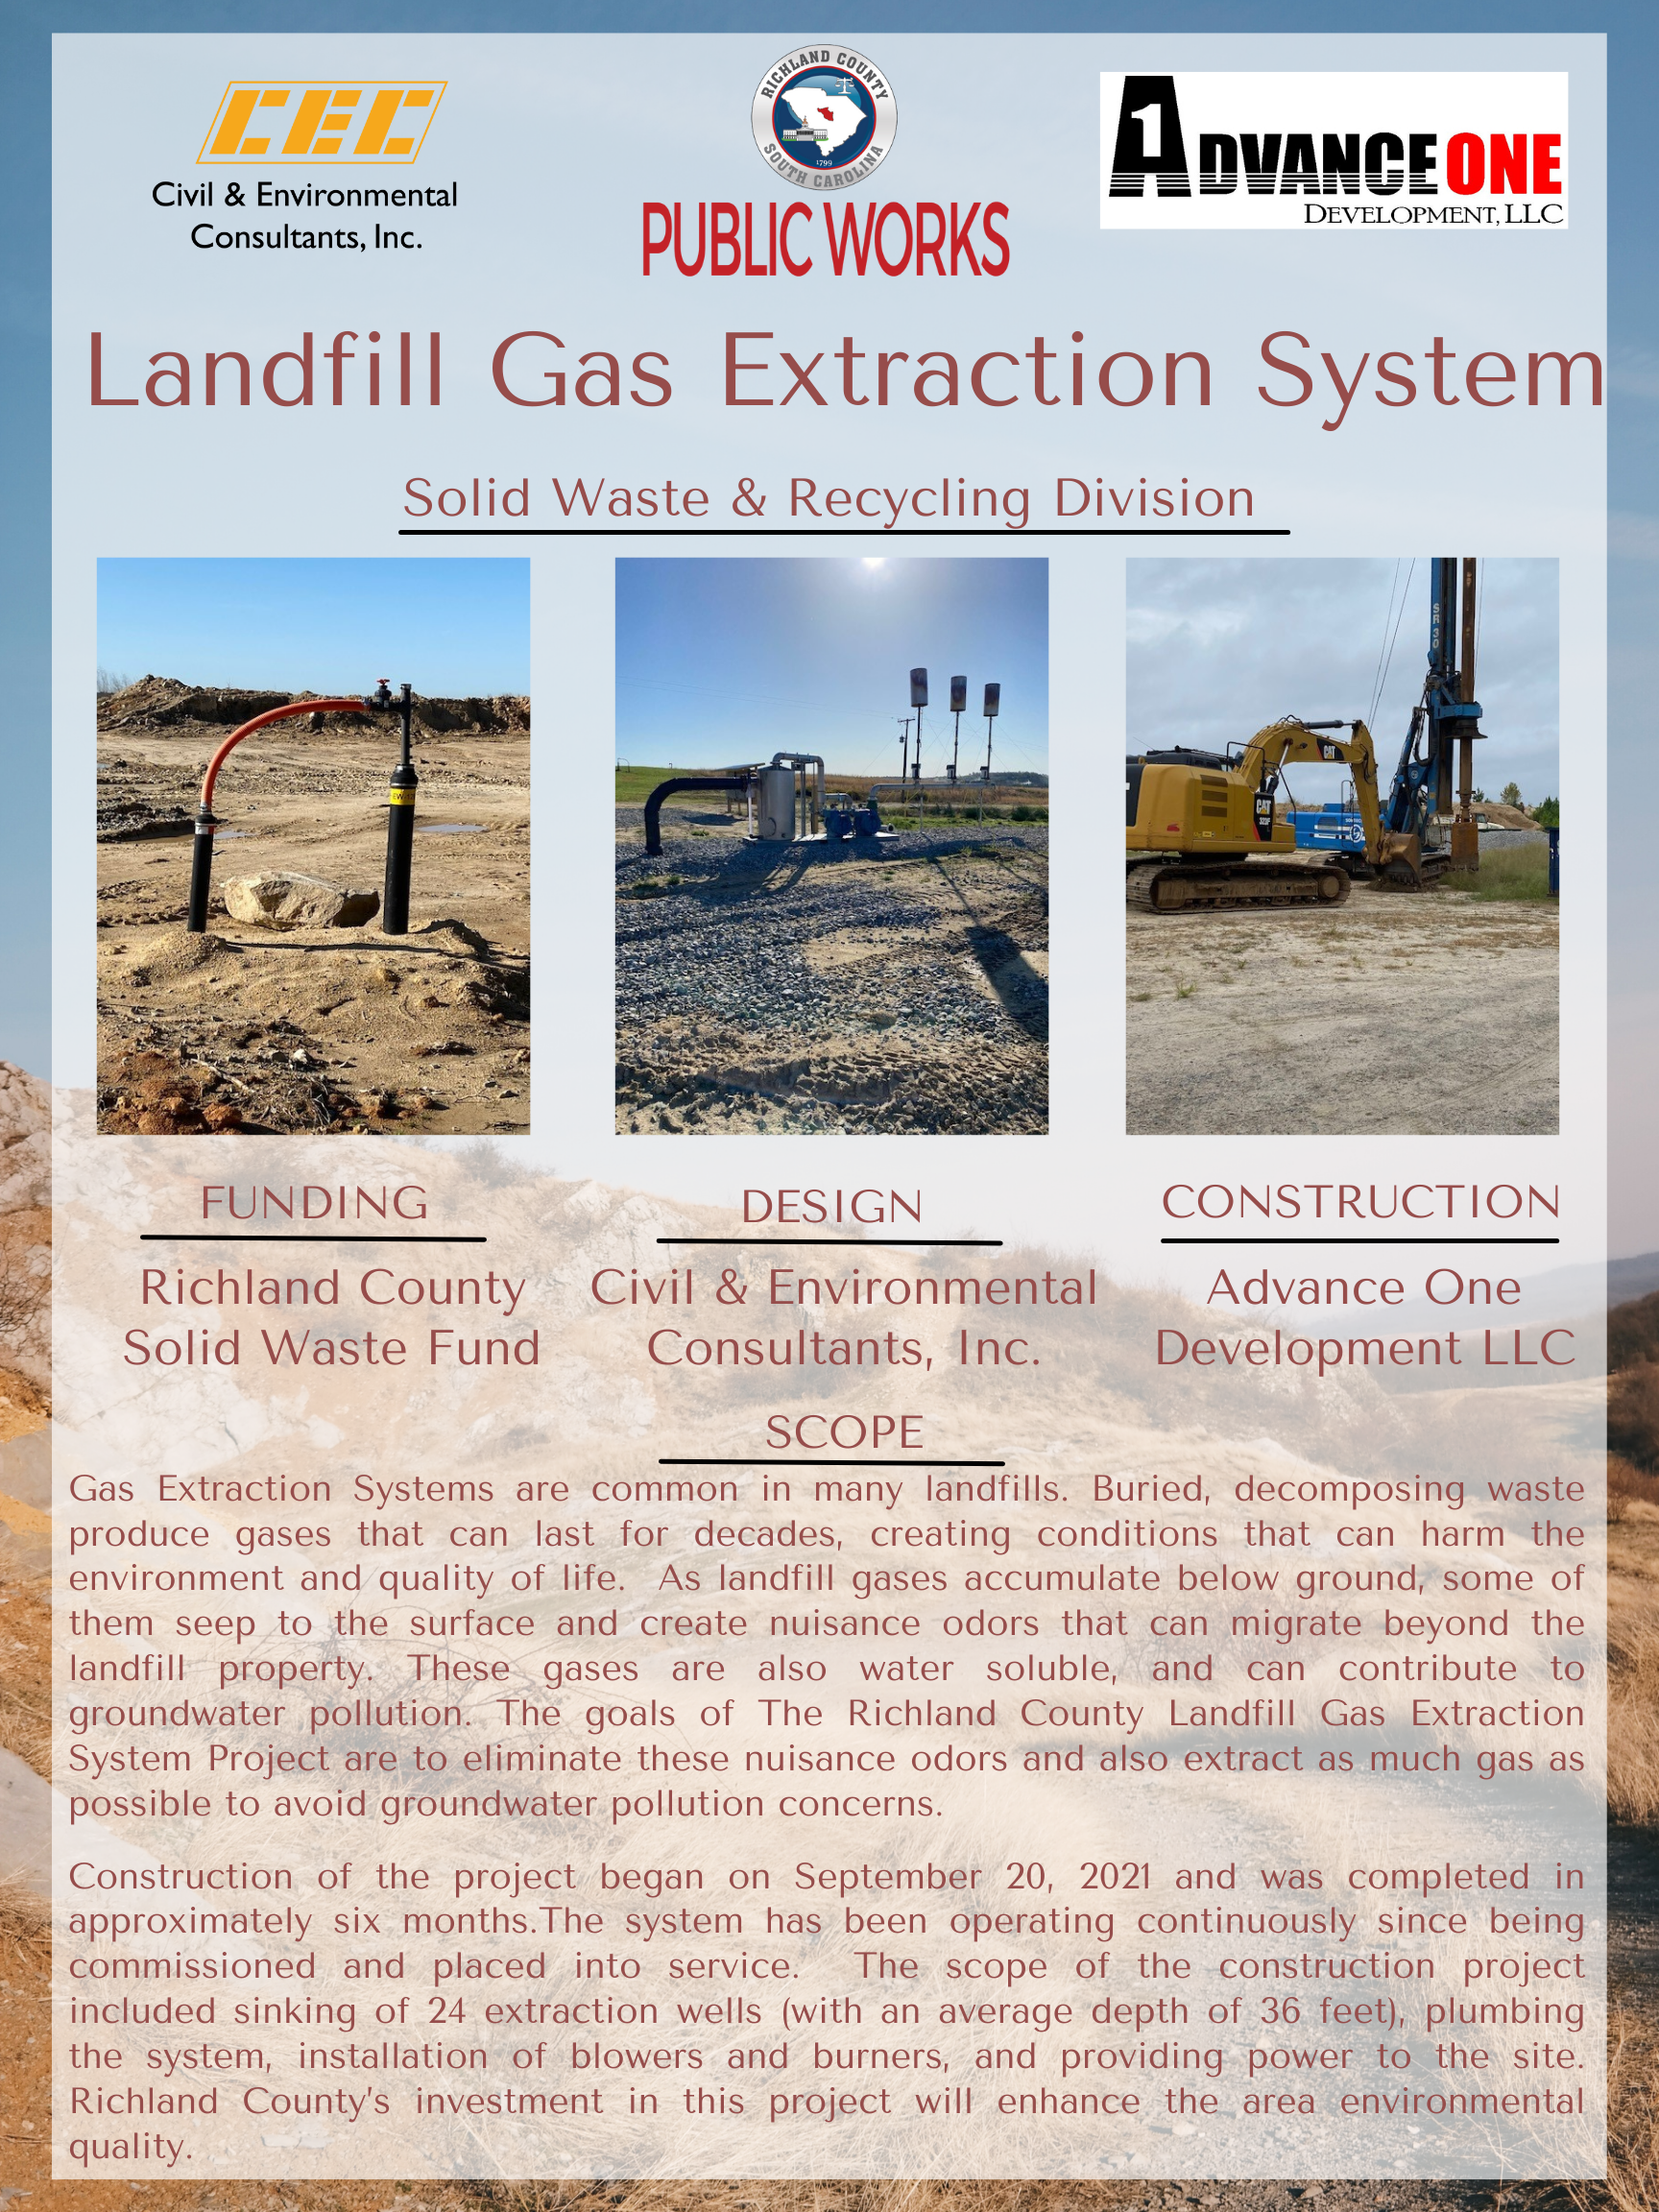 PDF Image of Landfill Gas Extraction System